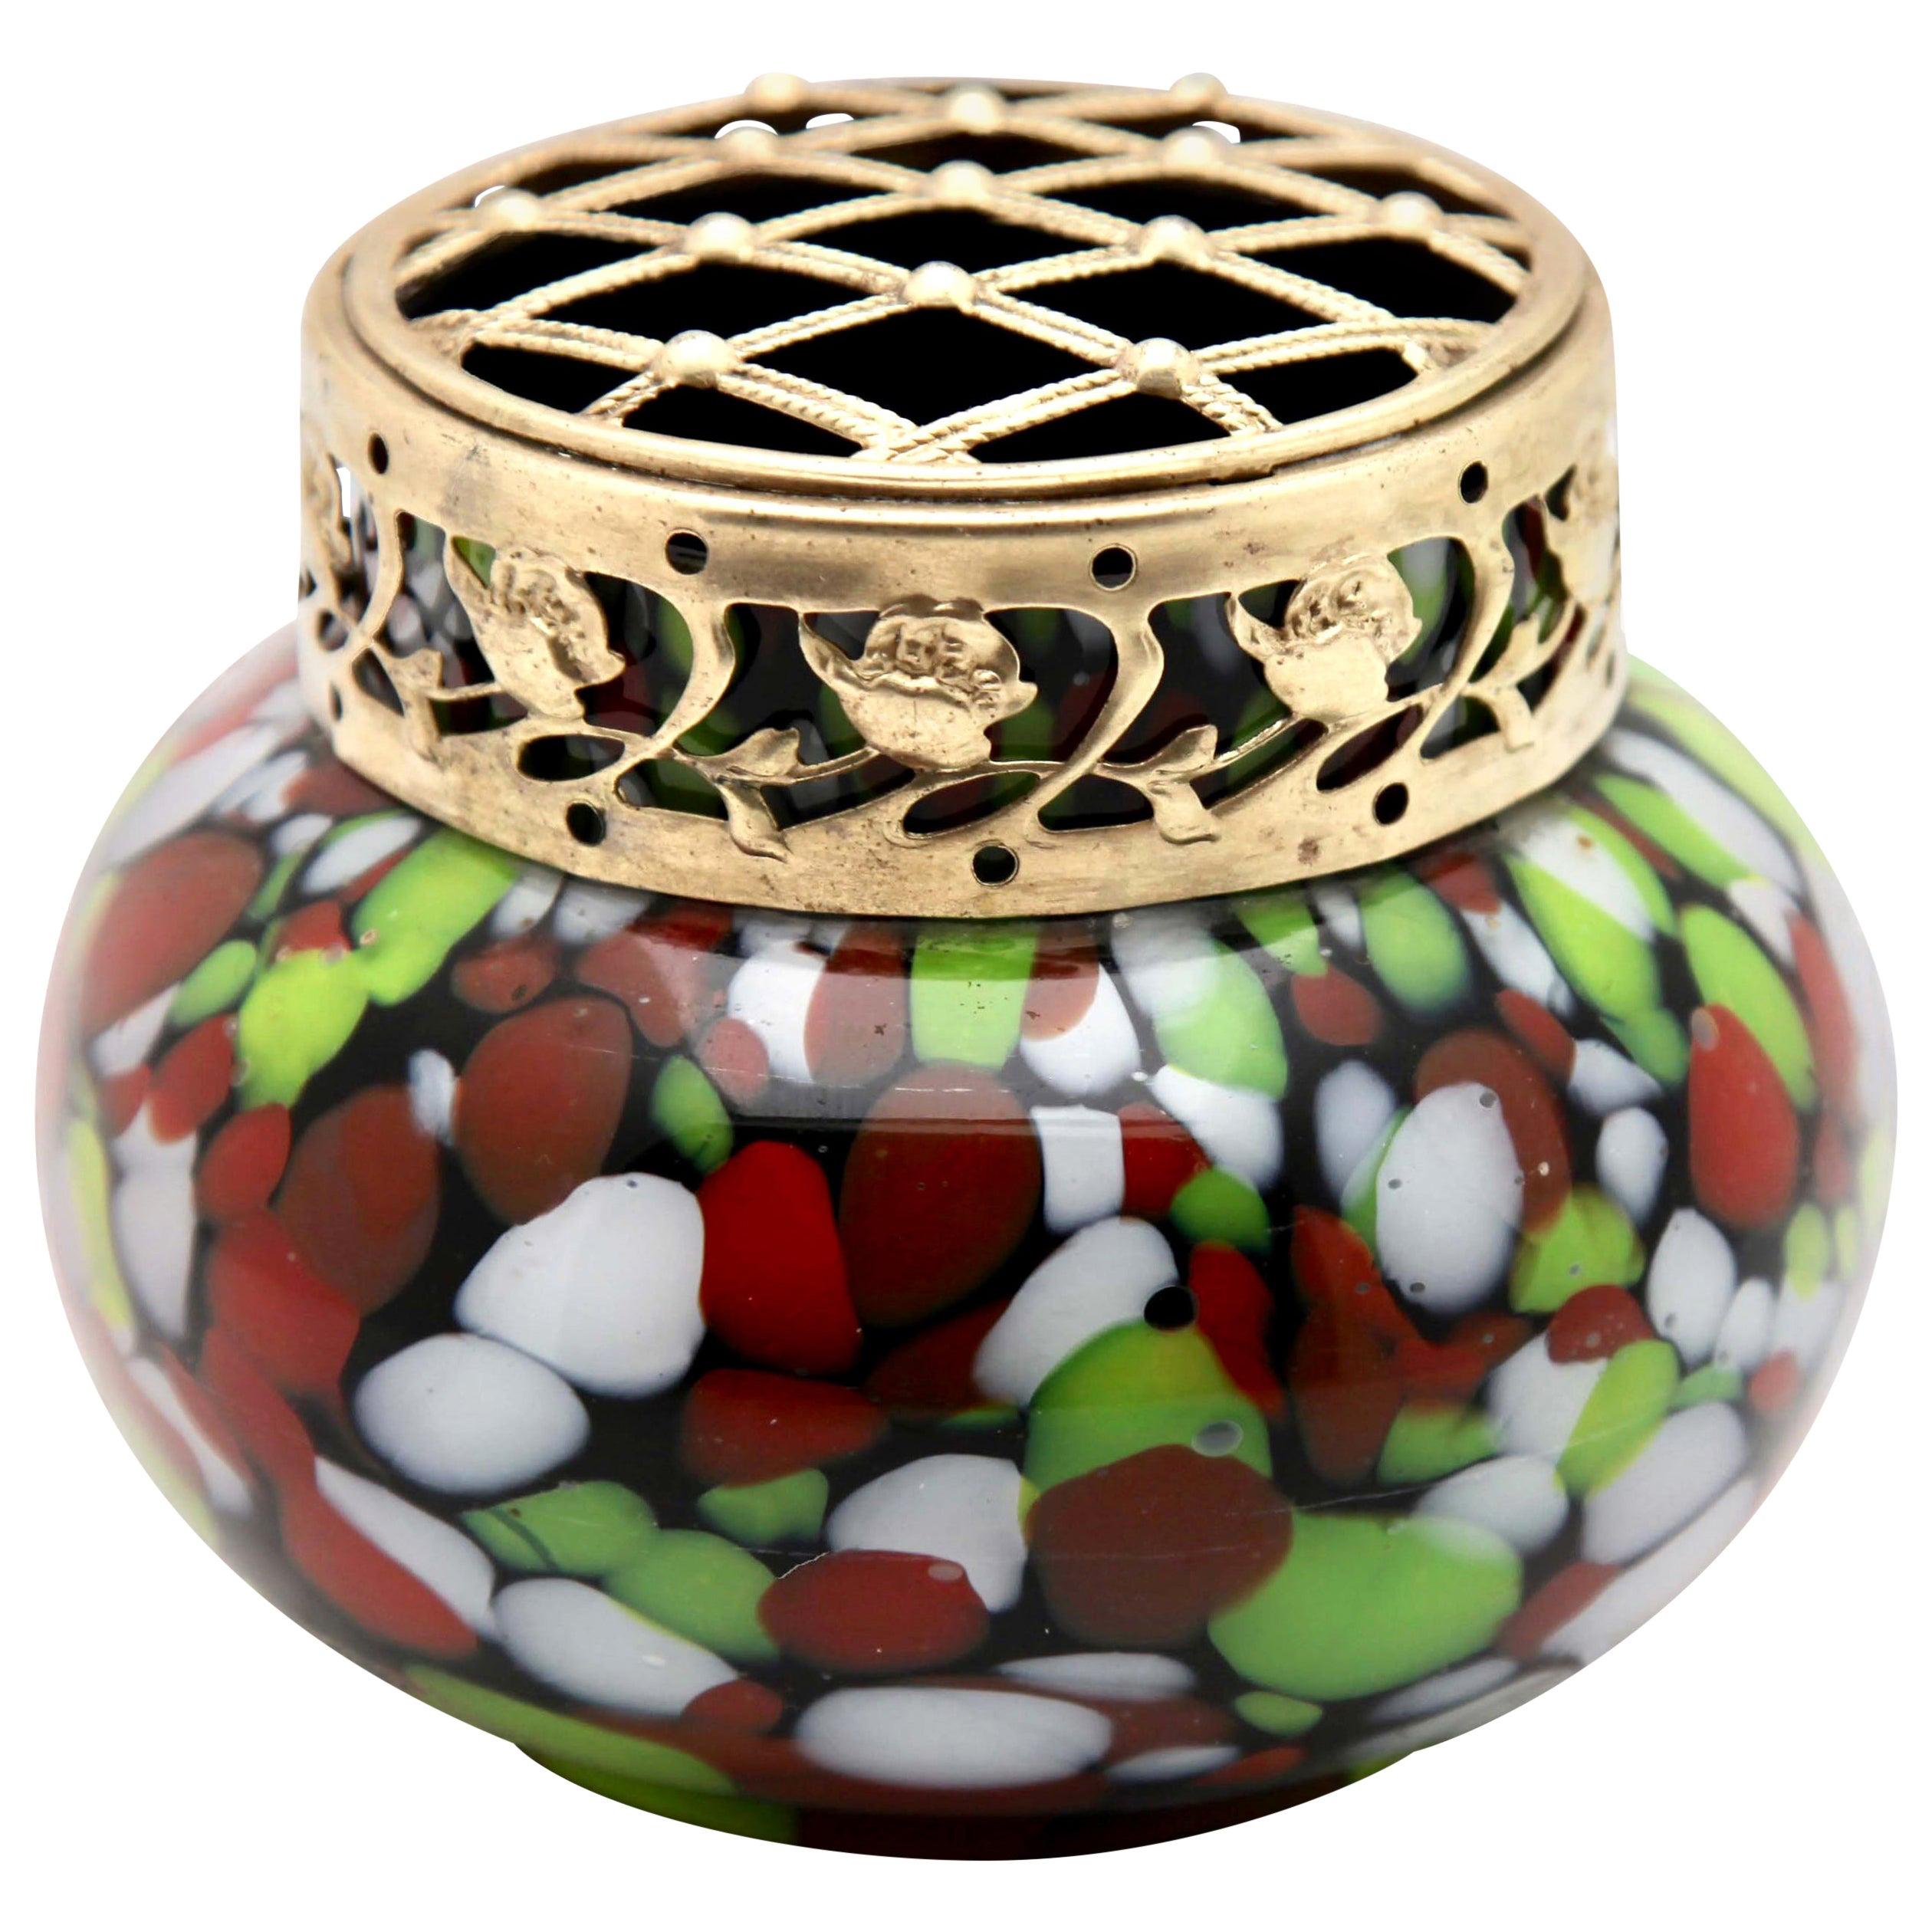 'Pique Fleurs' Vase in Red, White, Green Splatter Colors, with Grille For Sale